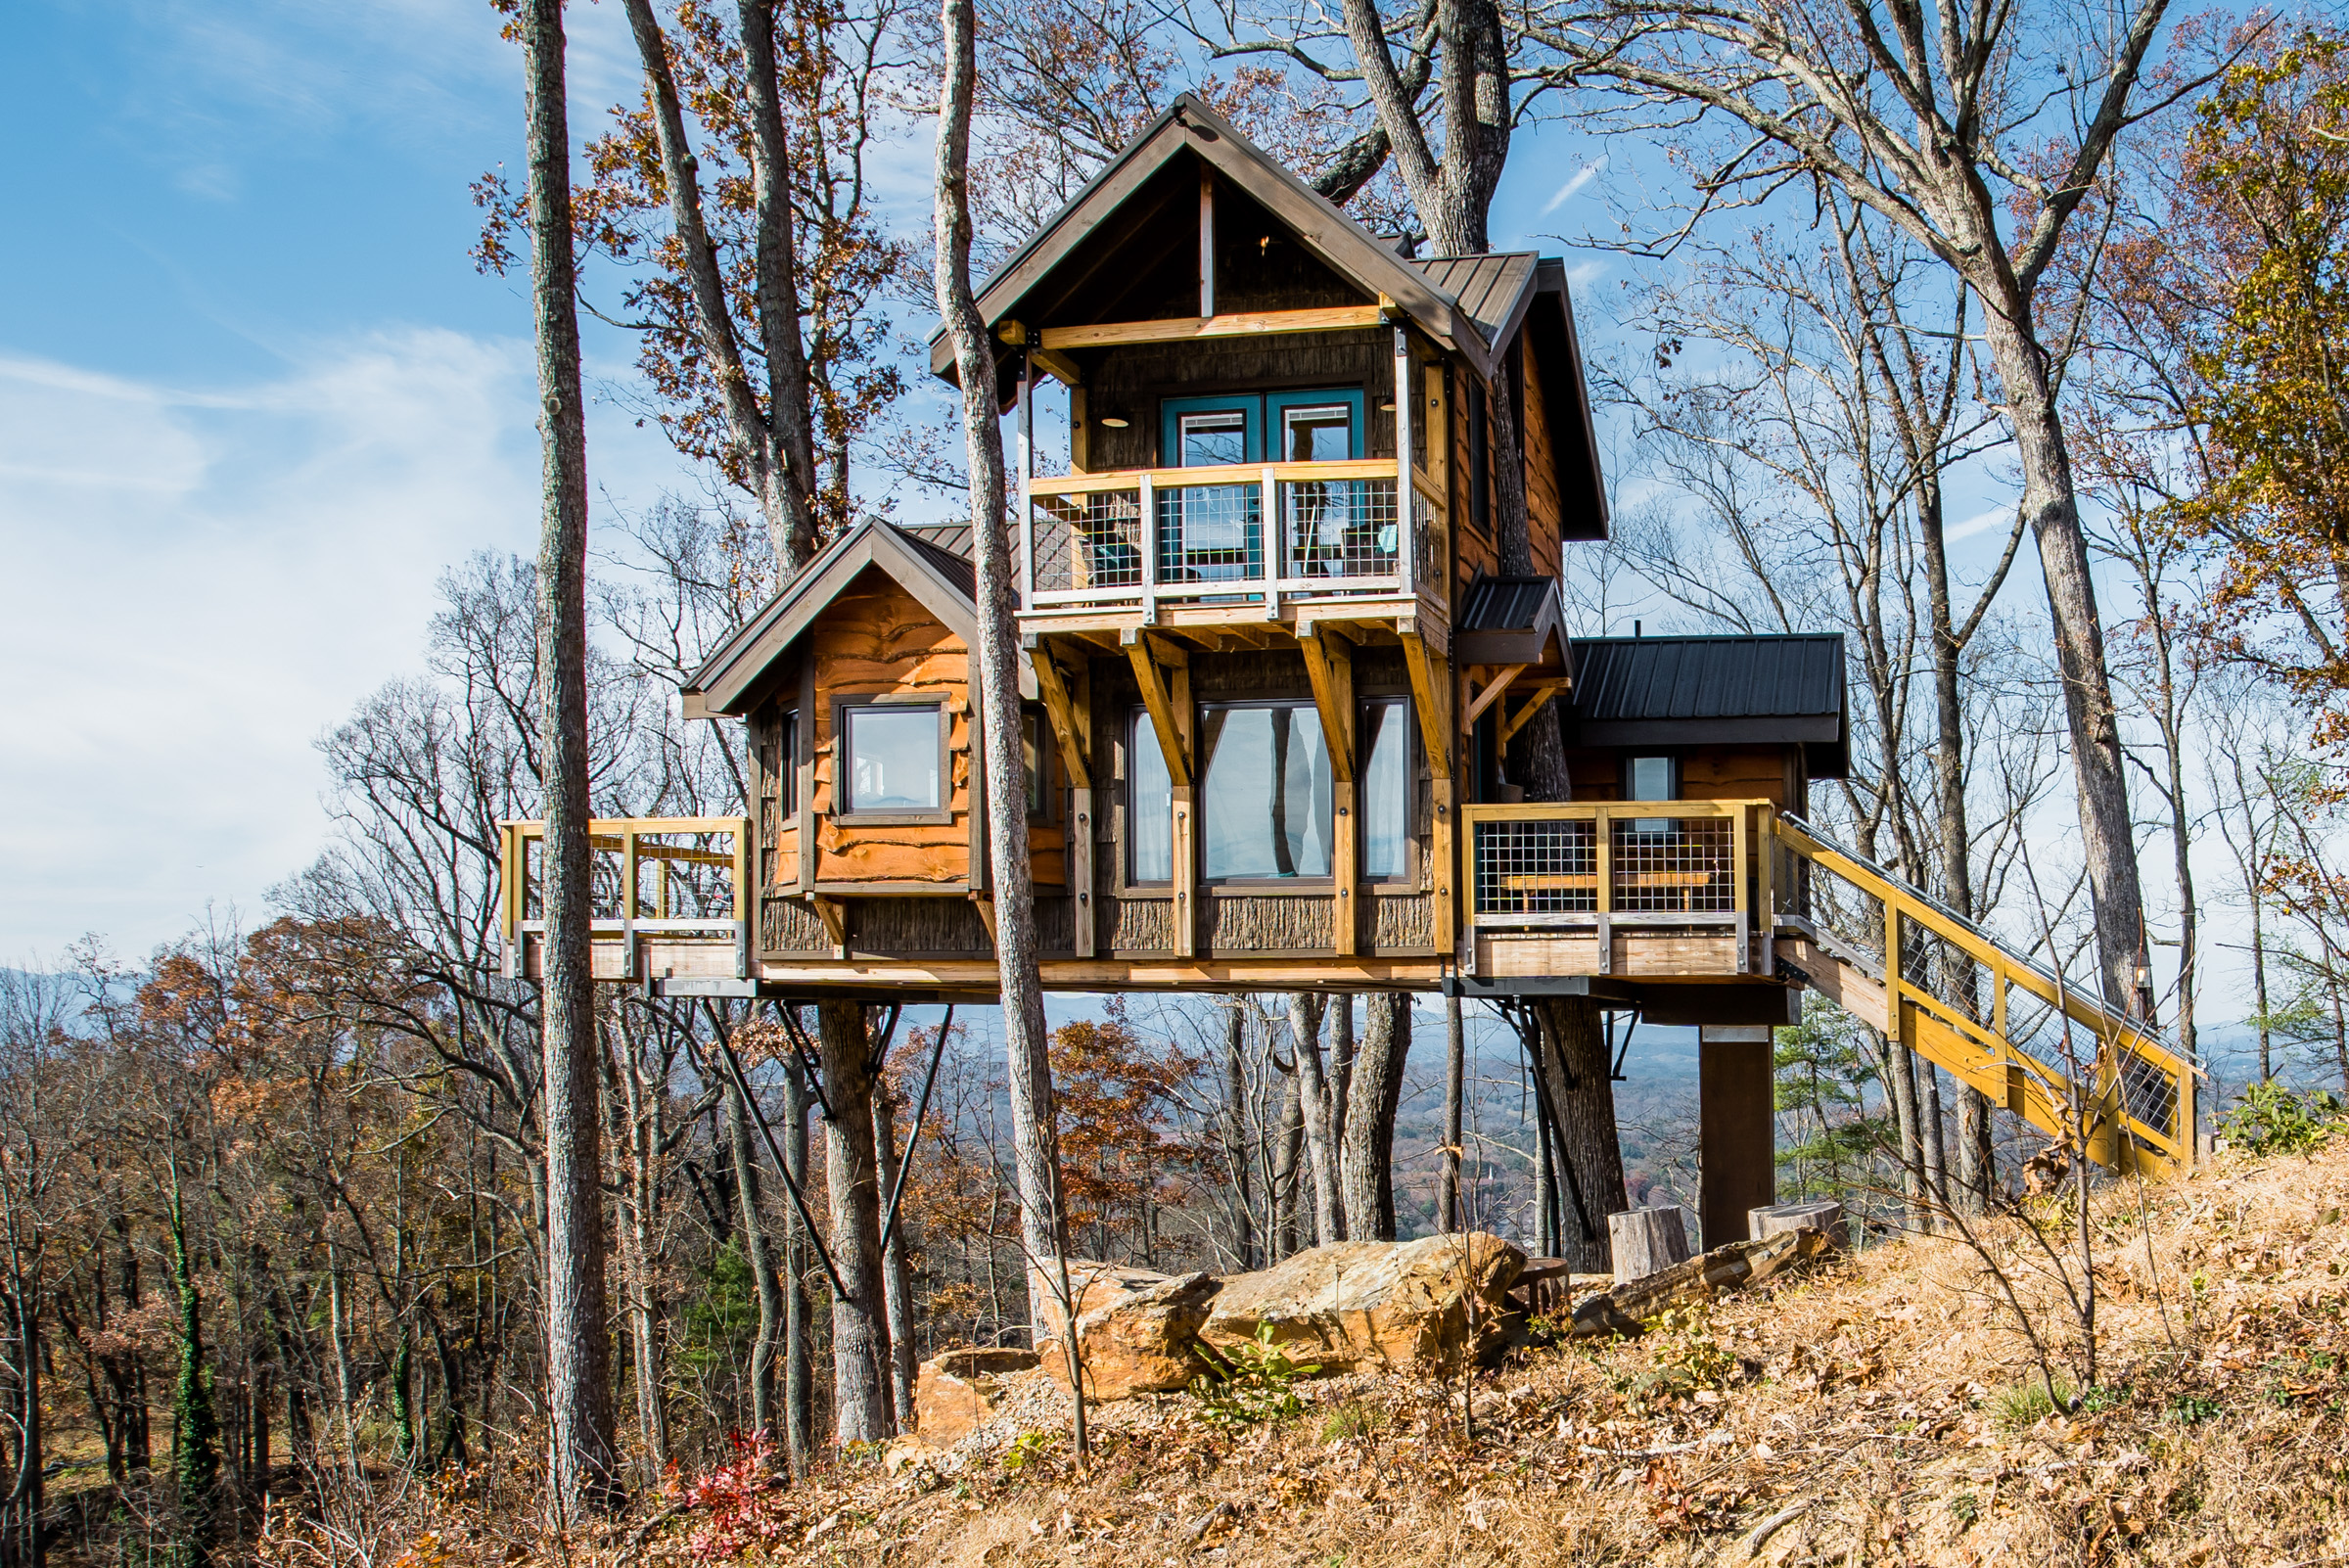 Modern treehouse with three wings elevated amongst bare trees on a hillside.